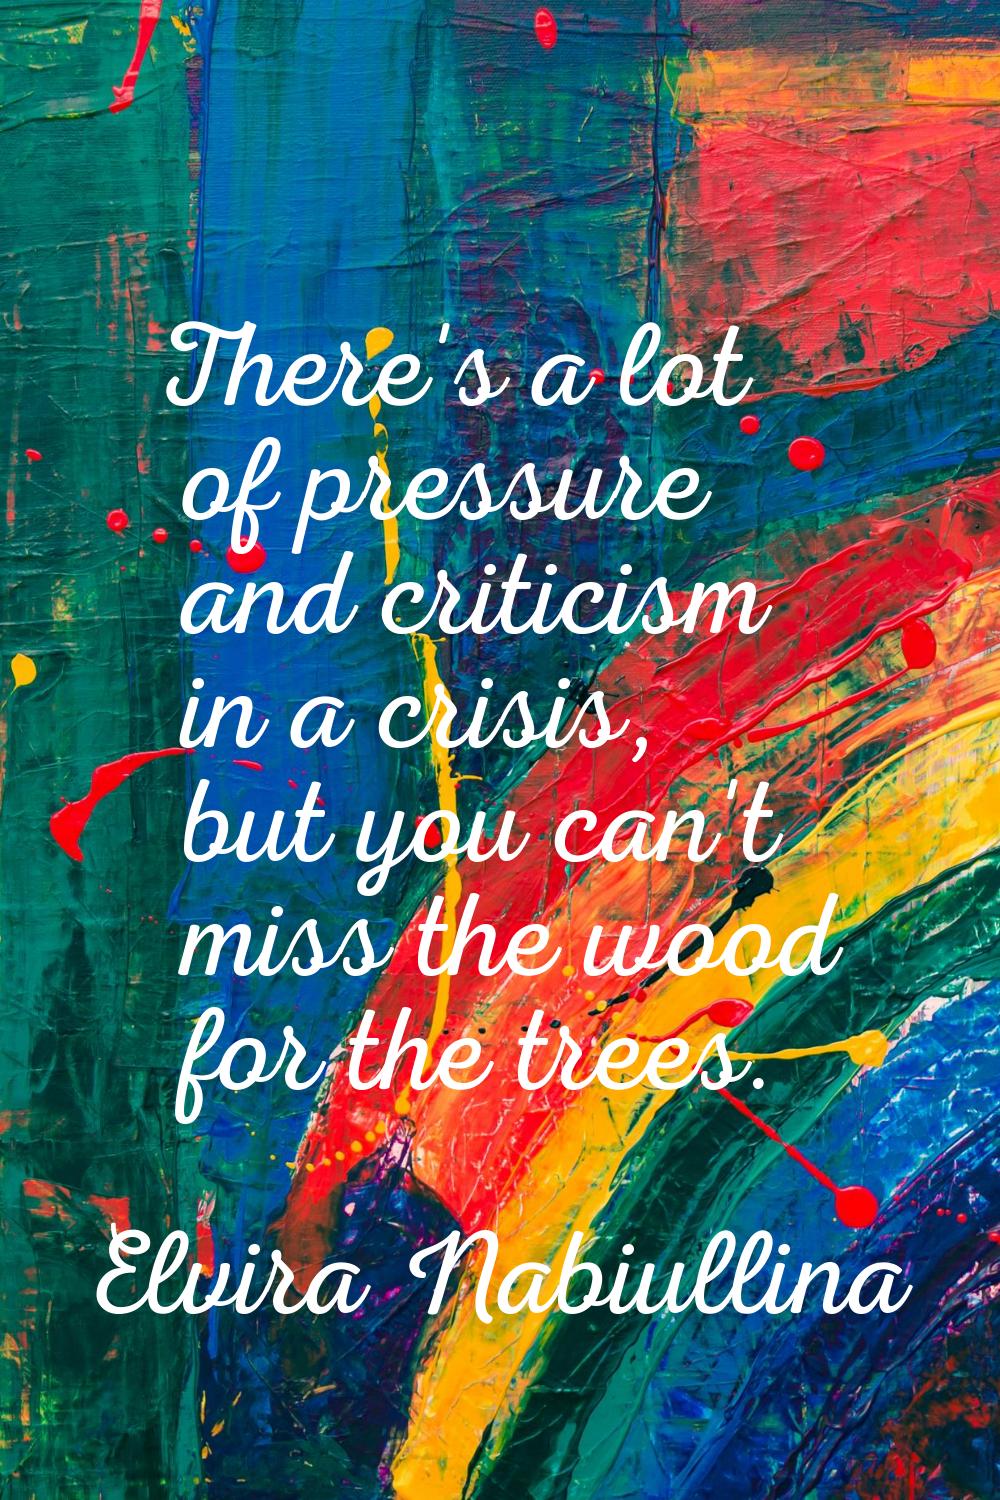 There's a lot of pressure and criticism in a crisis, but you can't miss the wood for the trees.